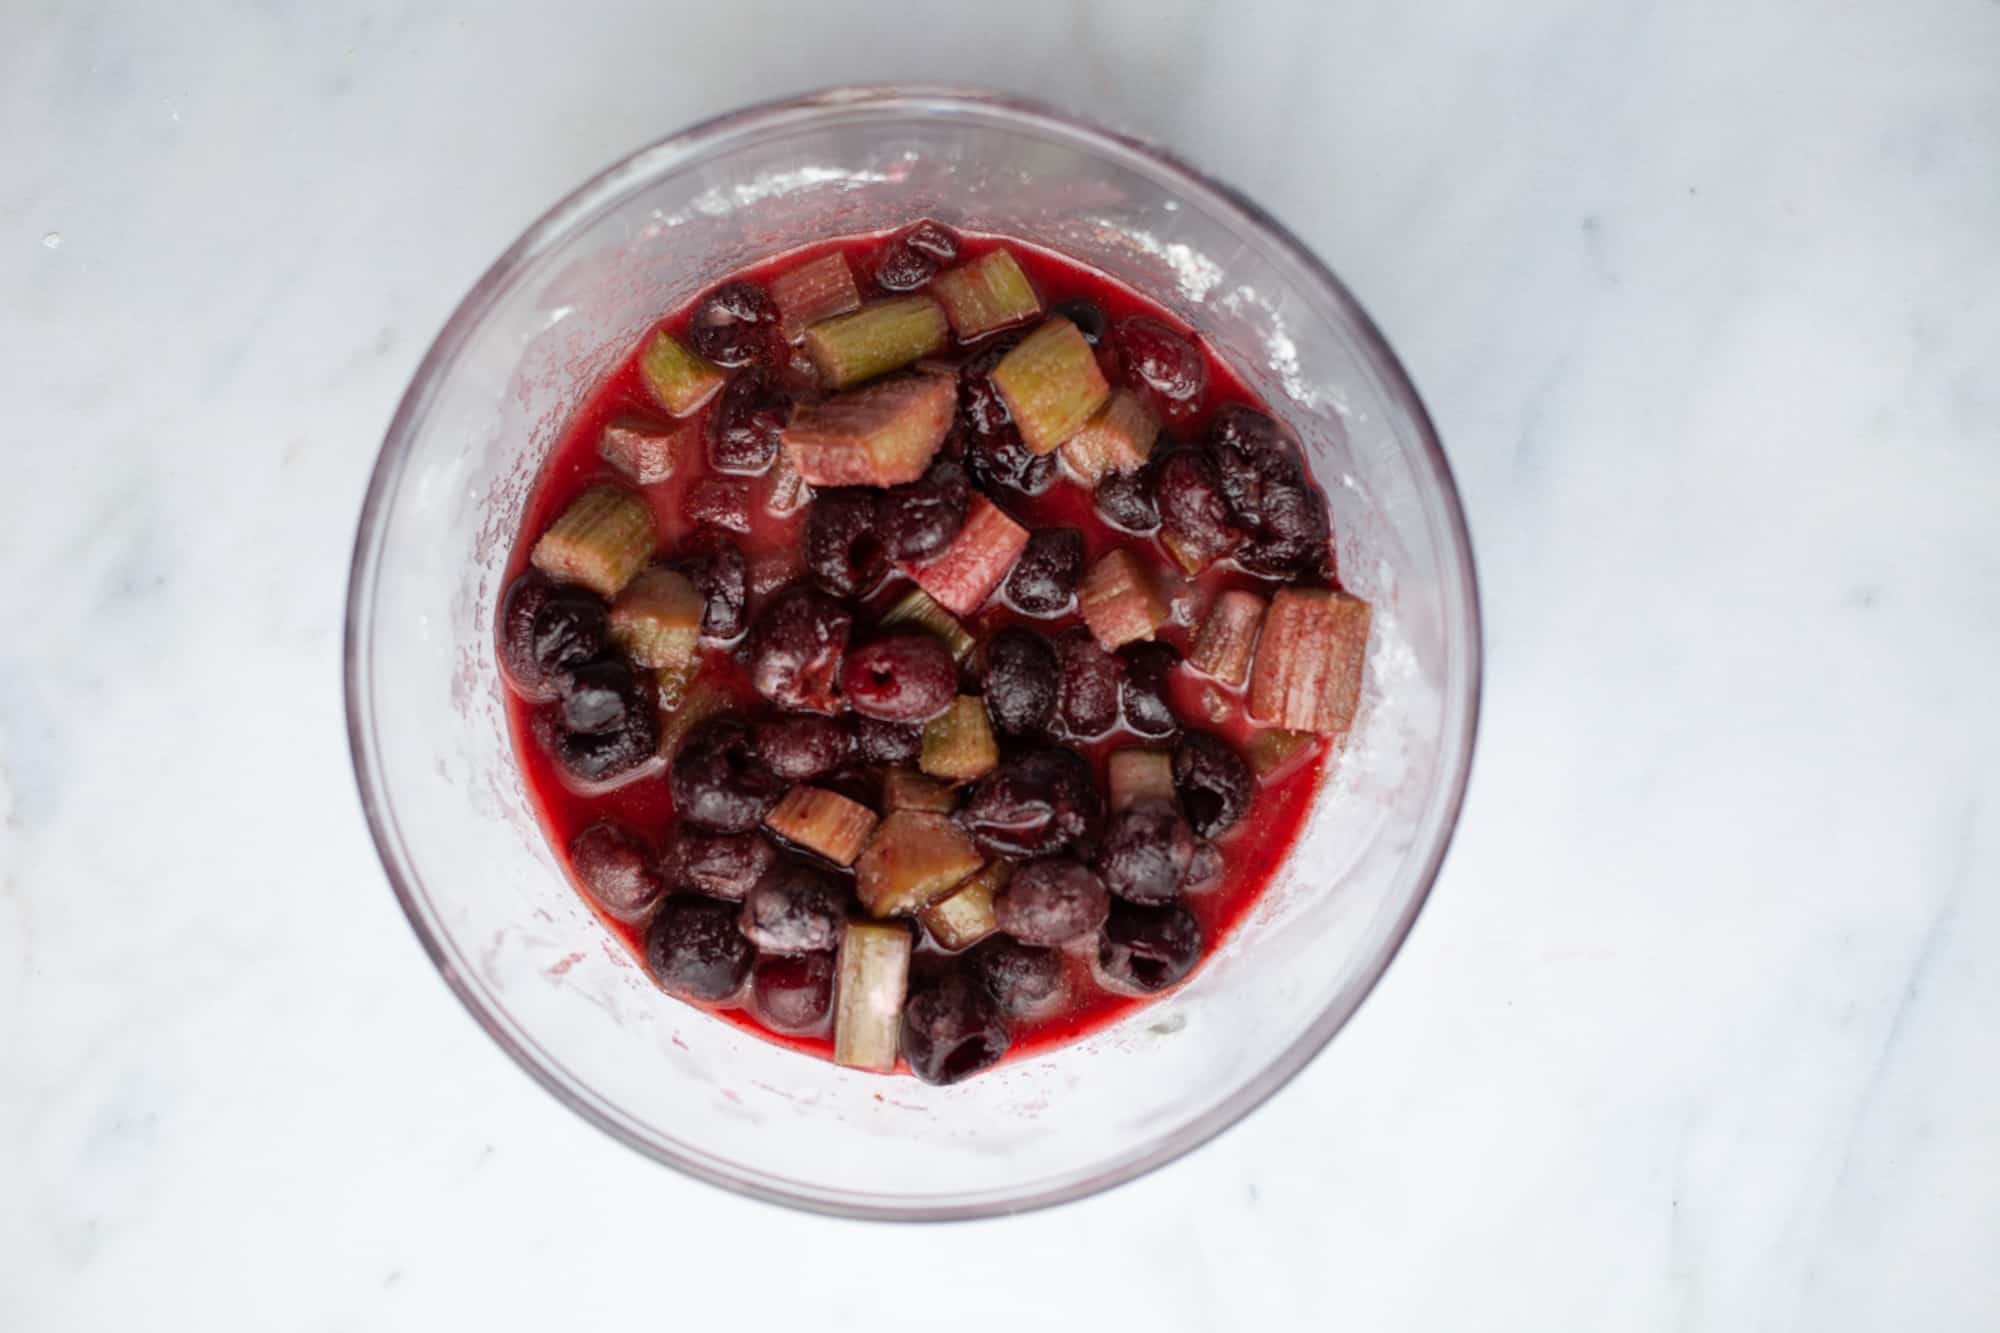 A pyrex mixing bowl with cherries, cut rhubarb and their juice